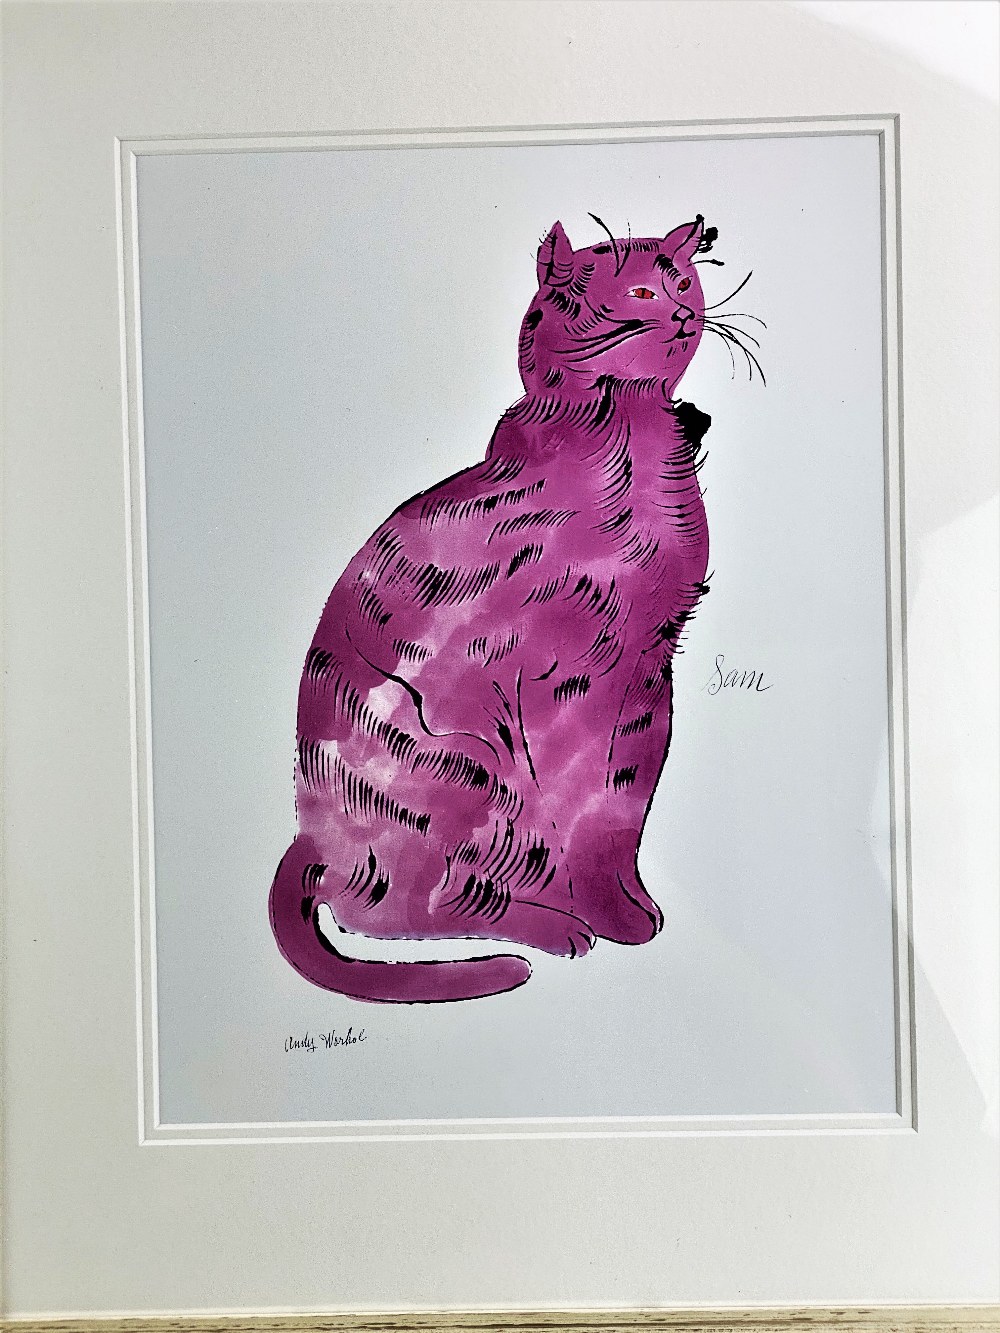 Andy Warhol "Pink Sam" 1954 Plate Signed Lithograph Print/Framed - Image 2 of 5